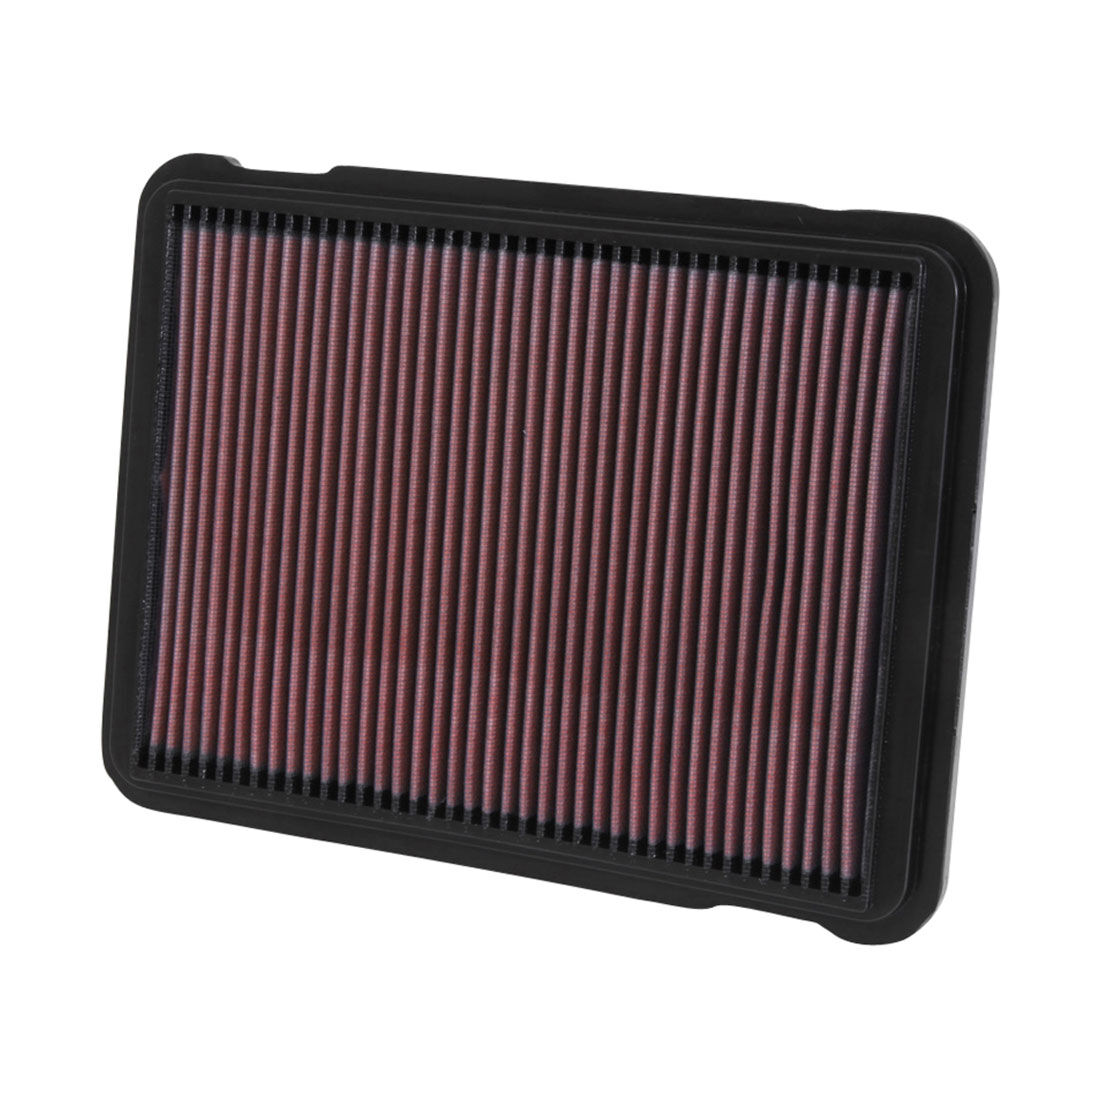 K&N Washable Air Filter 33-2146 (Interchangeable with A1499 